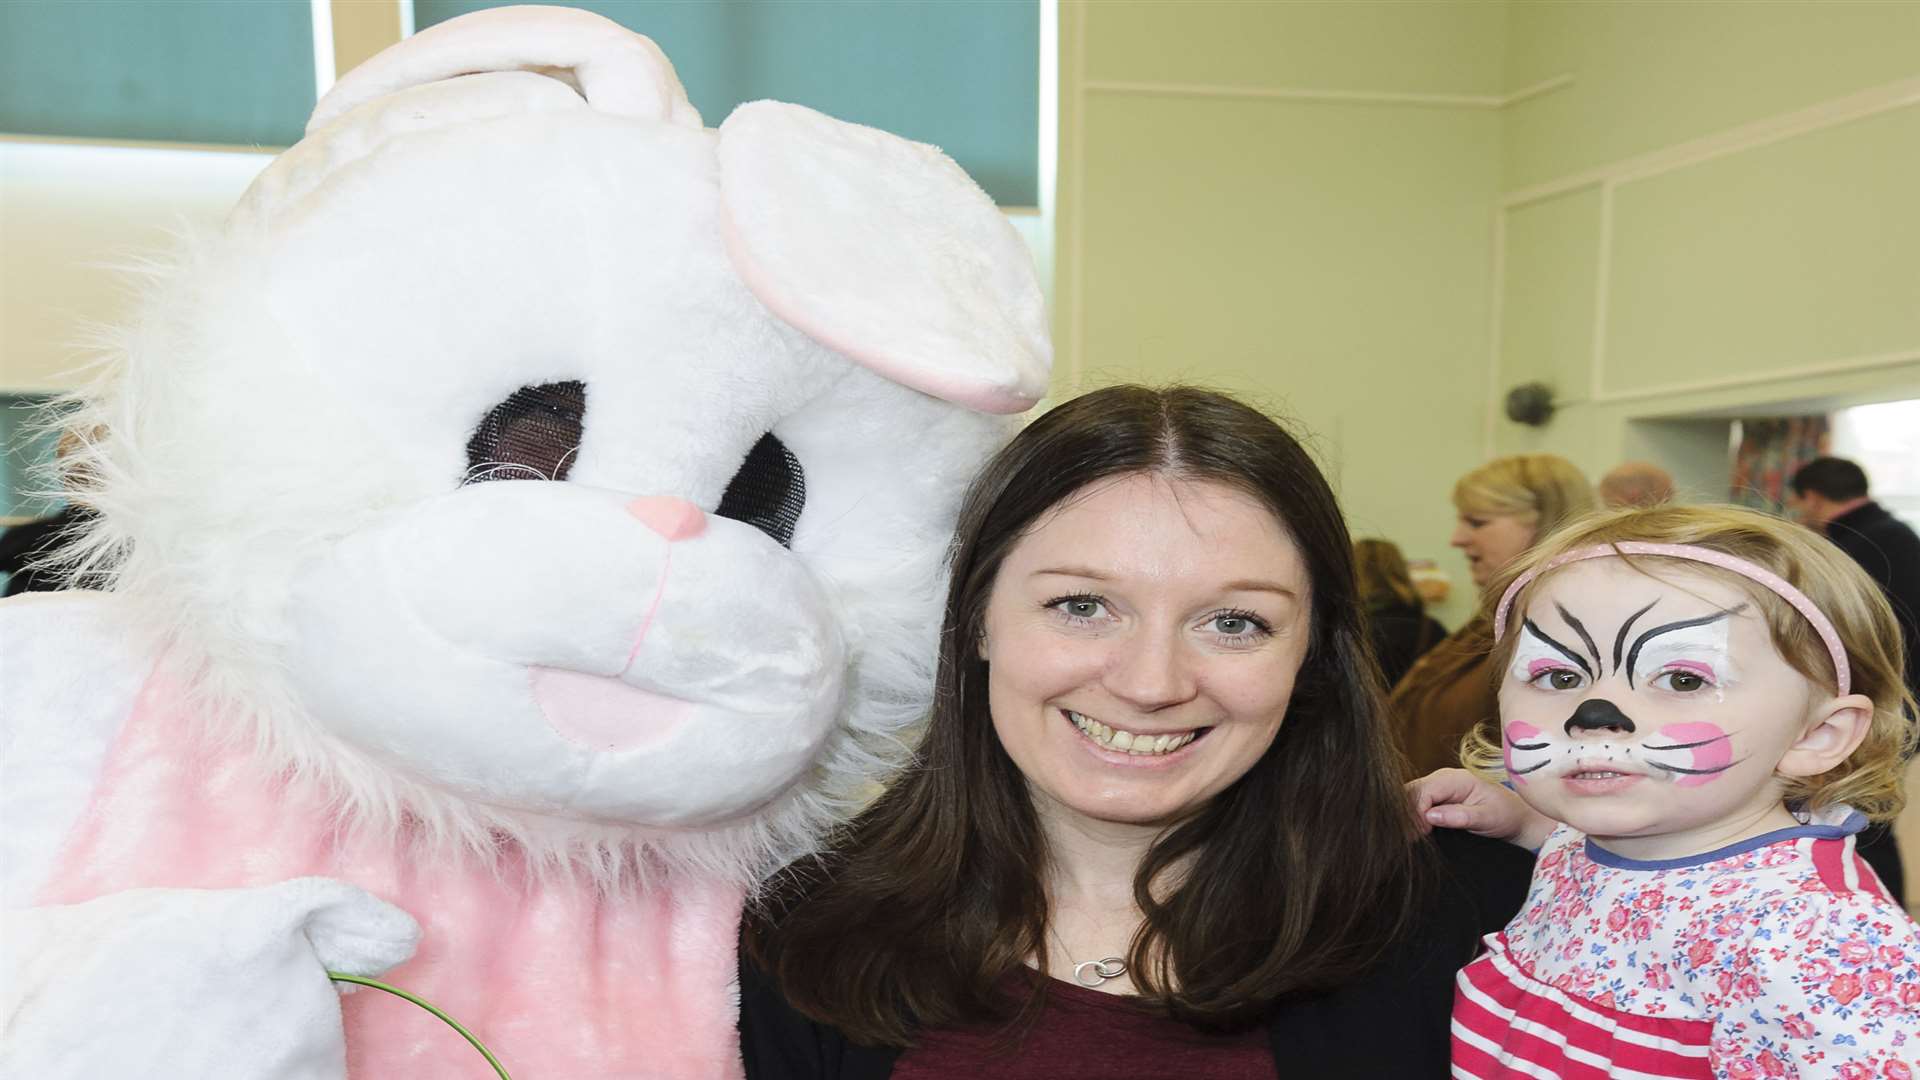 With the Easter Bunny are Donna Turner, and Jessica Turner, 2.